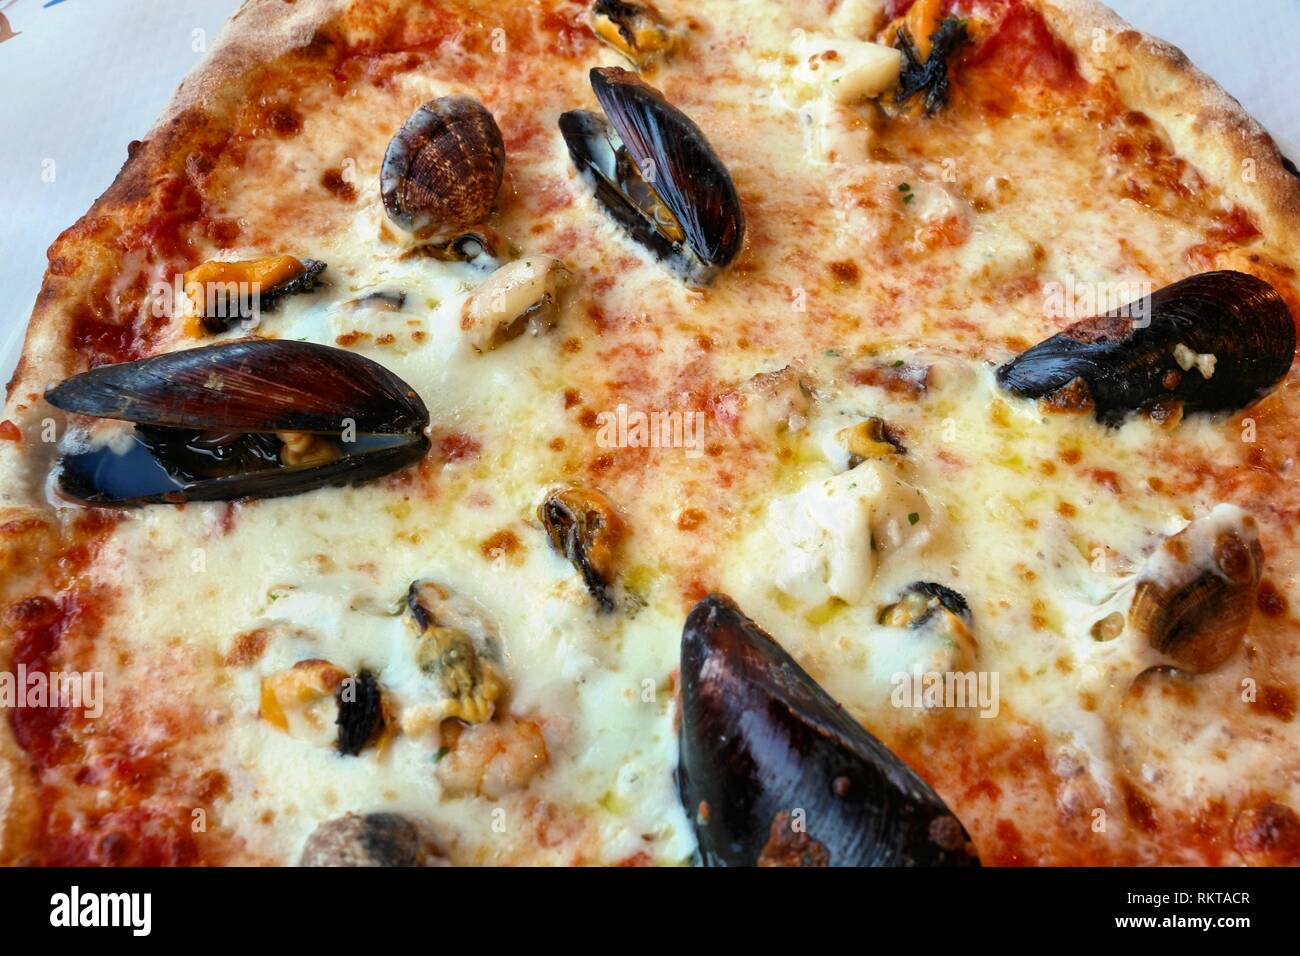 Frutti di mare pizza in Apulia, Italy. Pizza with clams, mussels and shrimps. Stock Photo